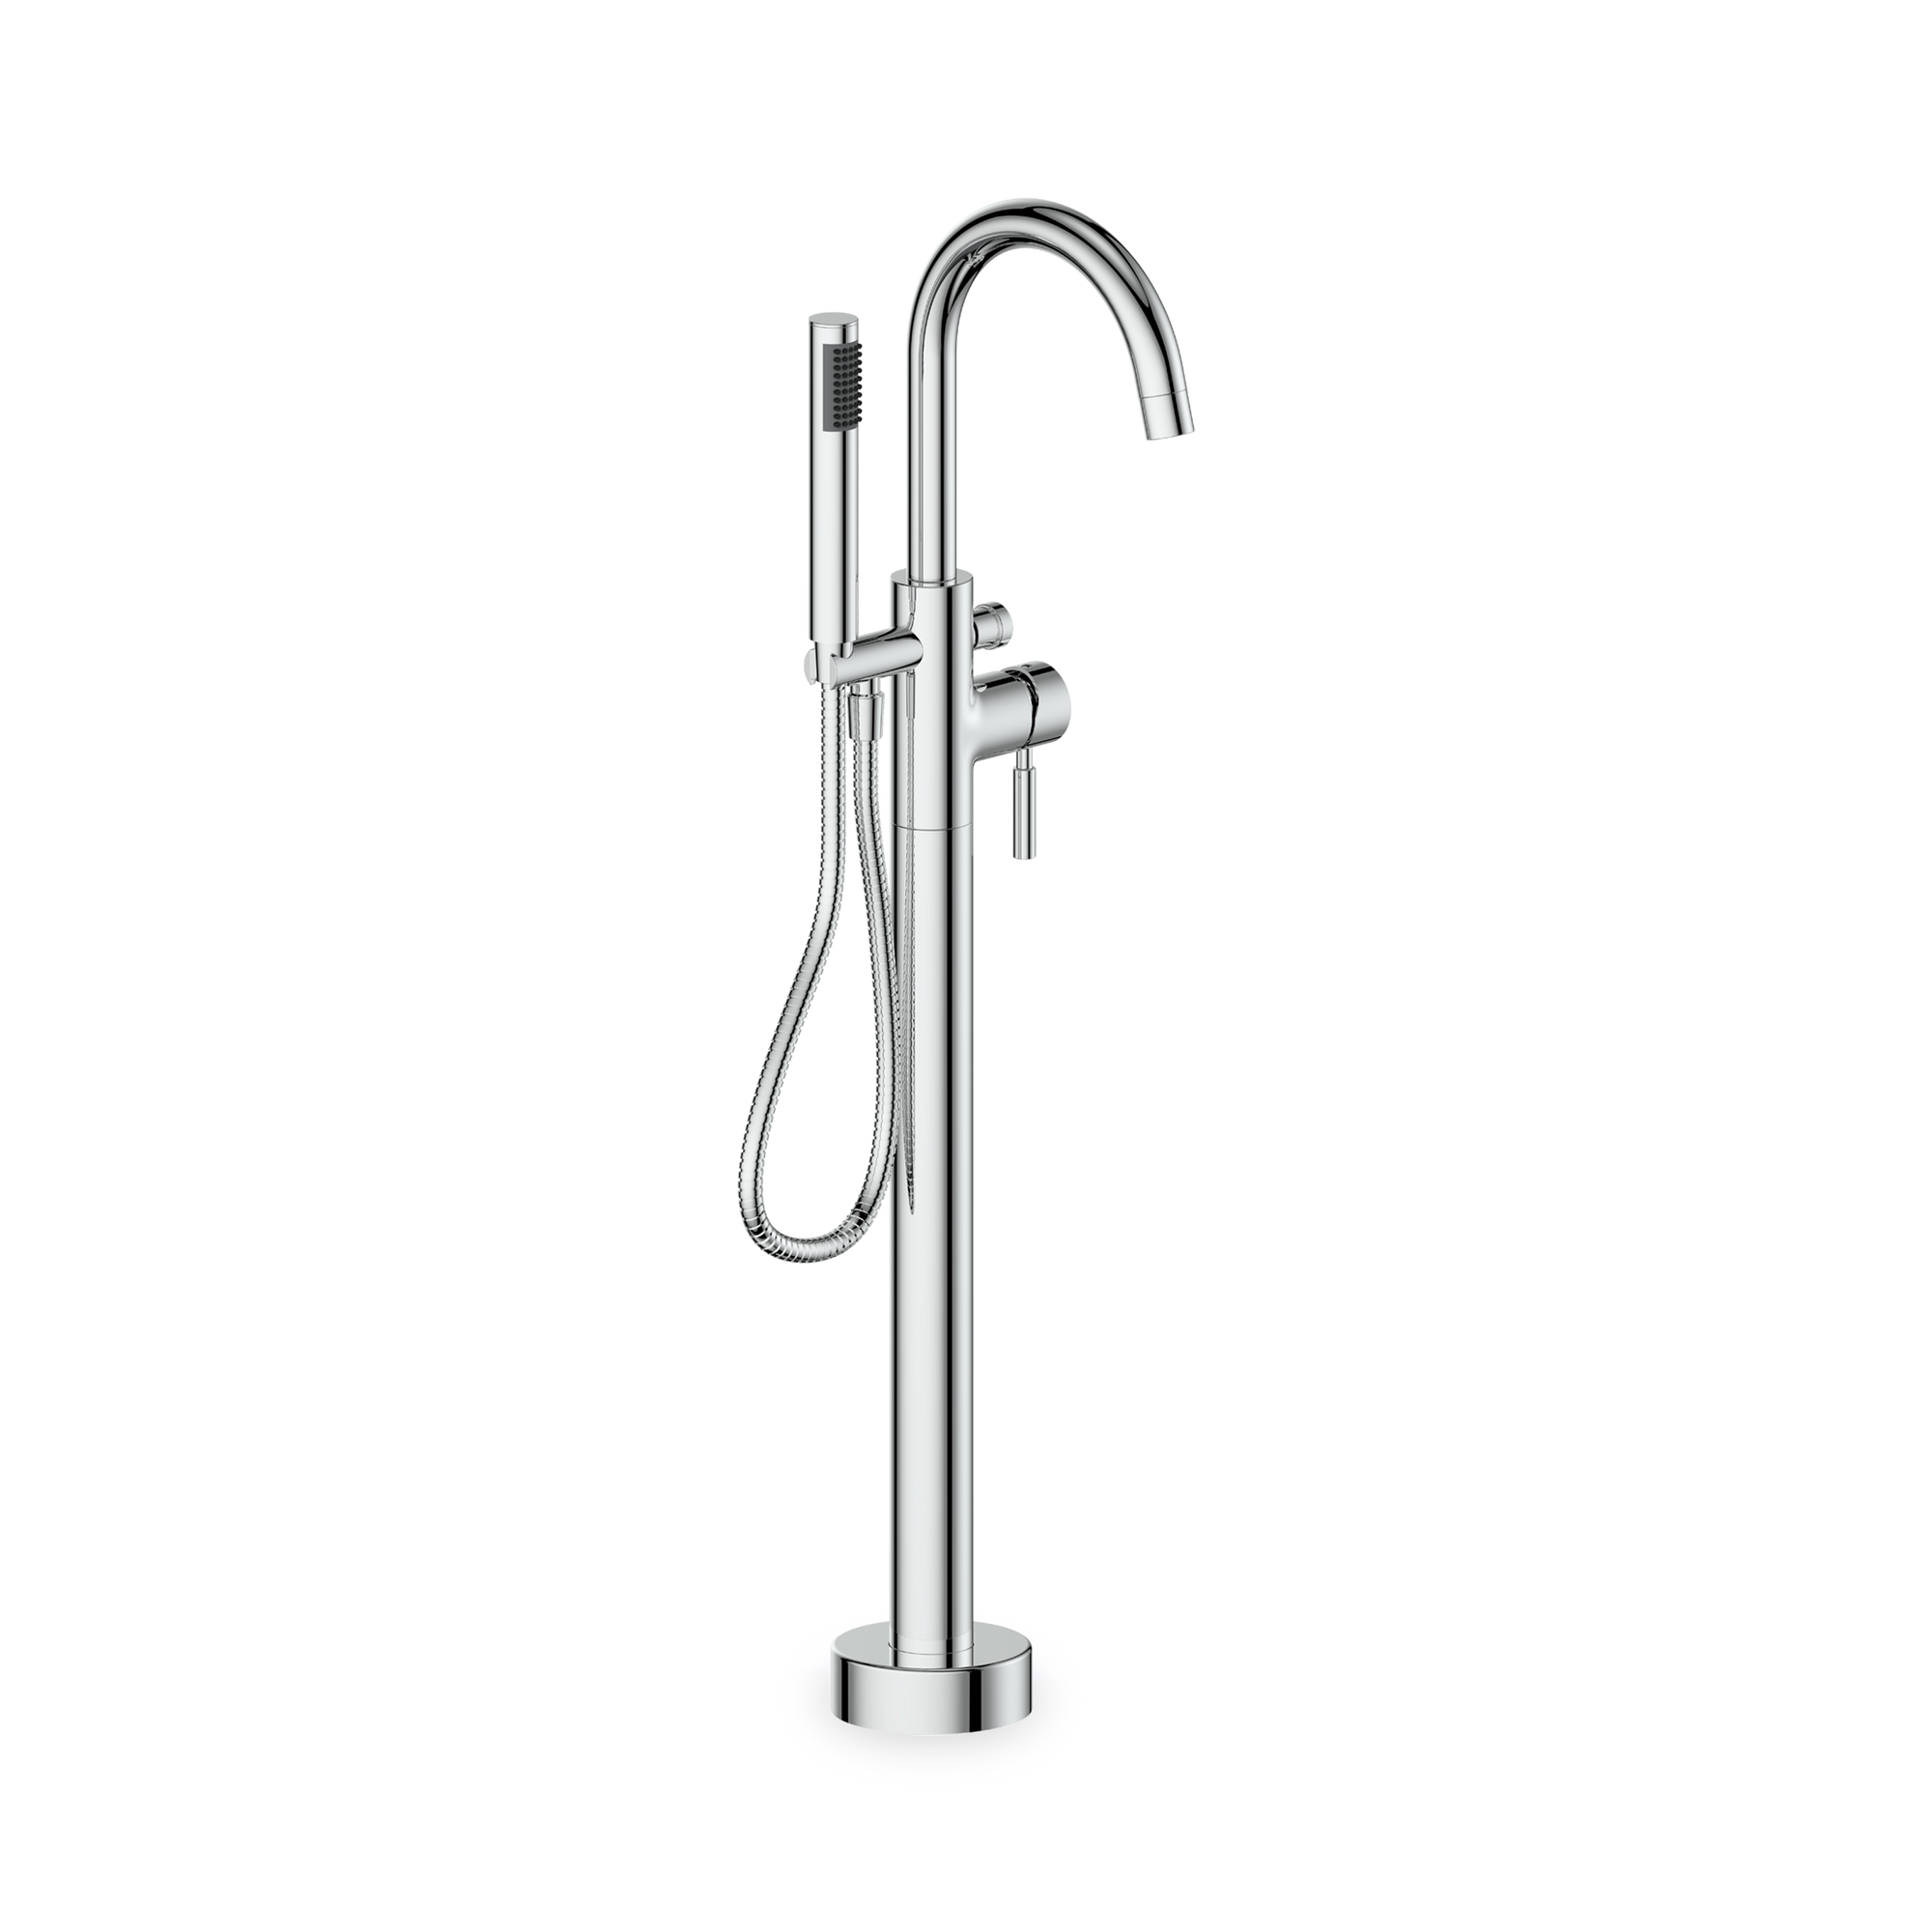 A free standing tub filler featuring a cyindrical contemporary shape.